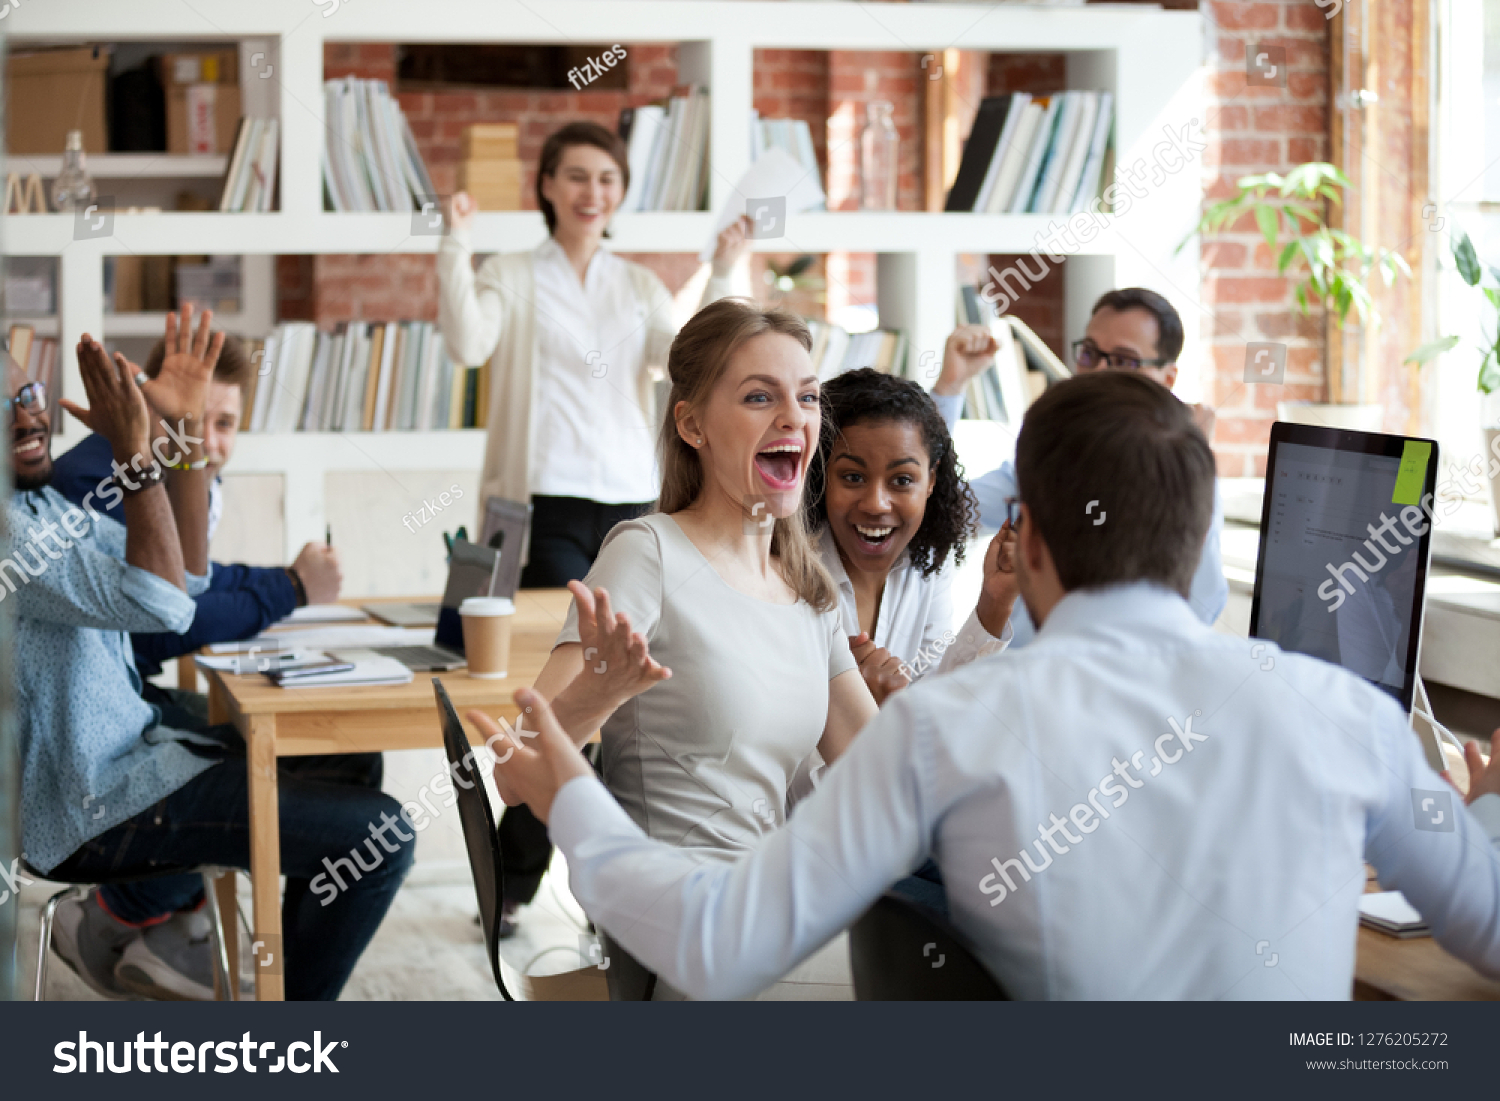 Excited diverse business team employees screaming celebrating good news business win corporate success, happy multi-ethnic colleagues workers group feeling motivated ecstatic about great achievement #1276205272